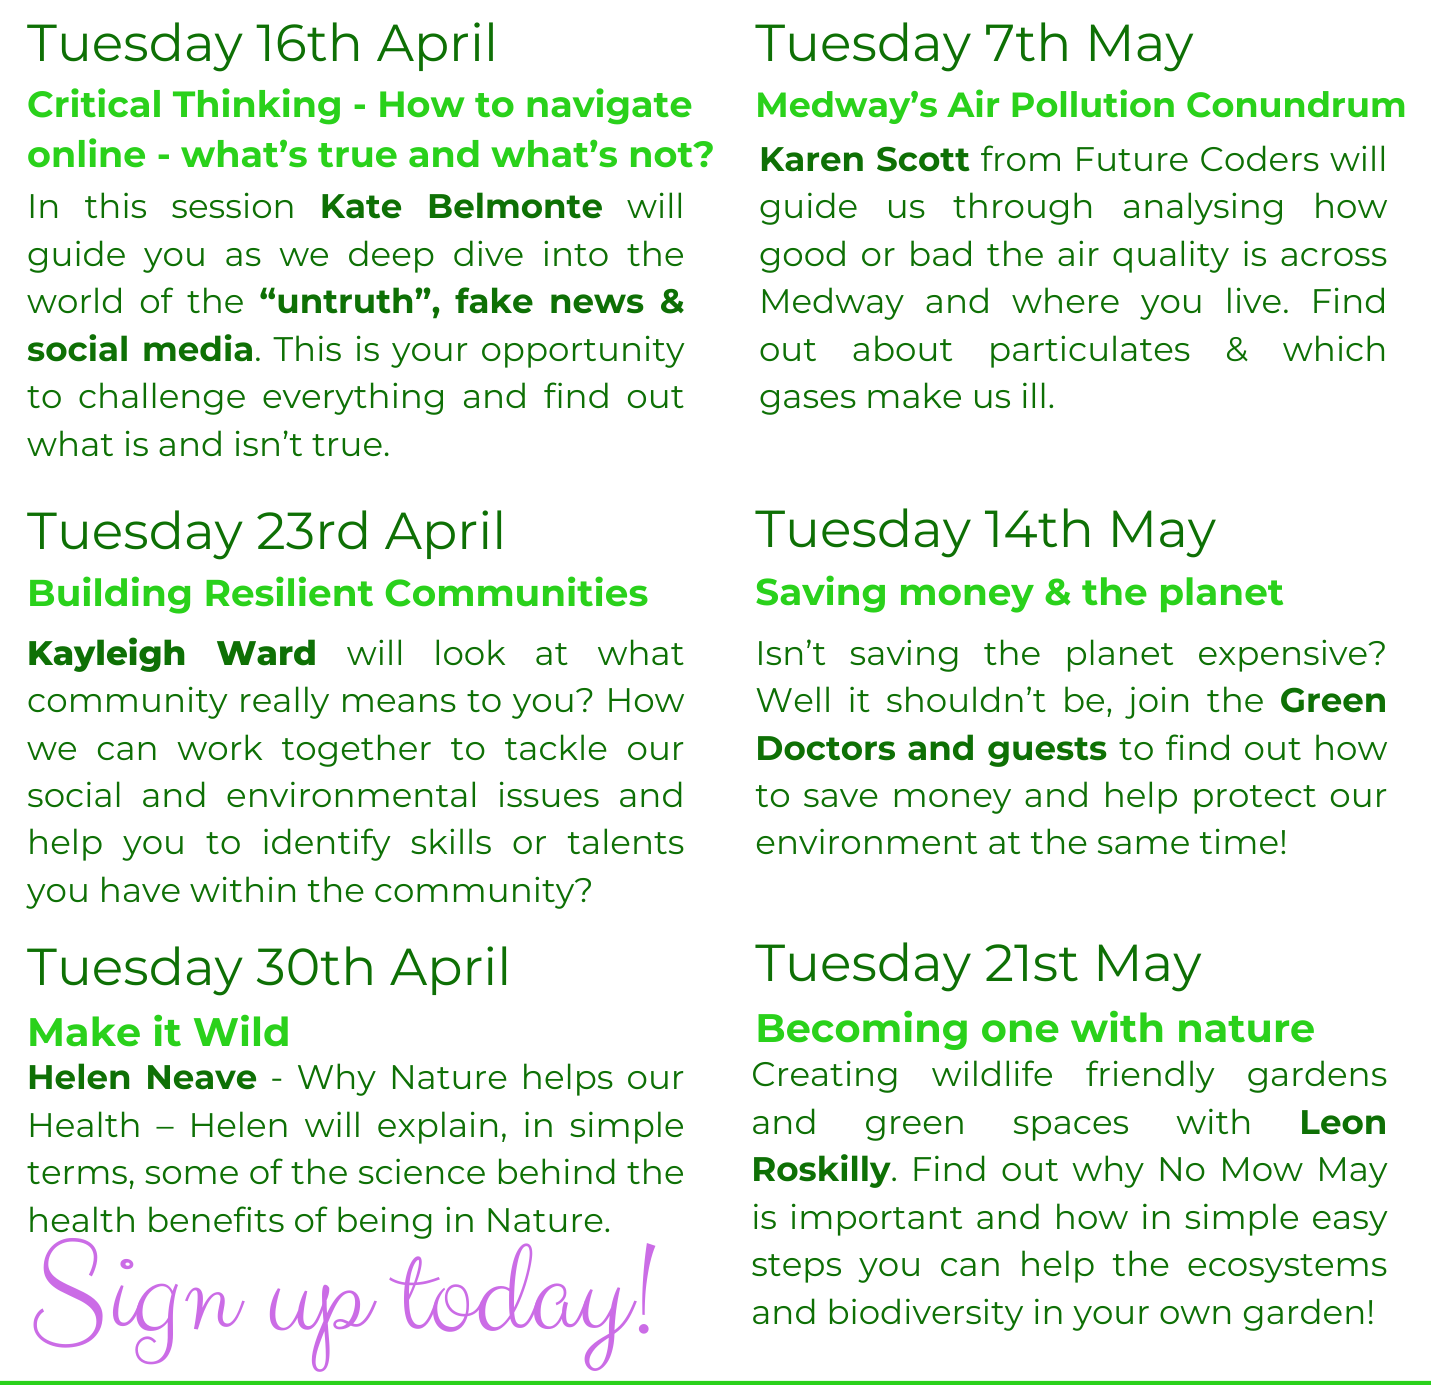 Twydall Climate Cafe Course starting Tuesday 16th April for 6 weeks